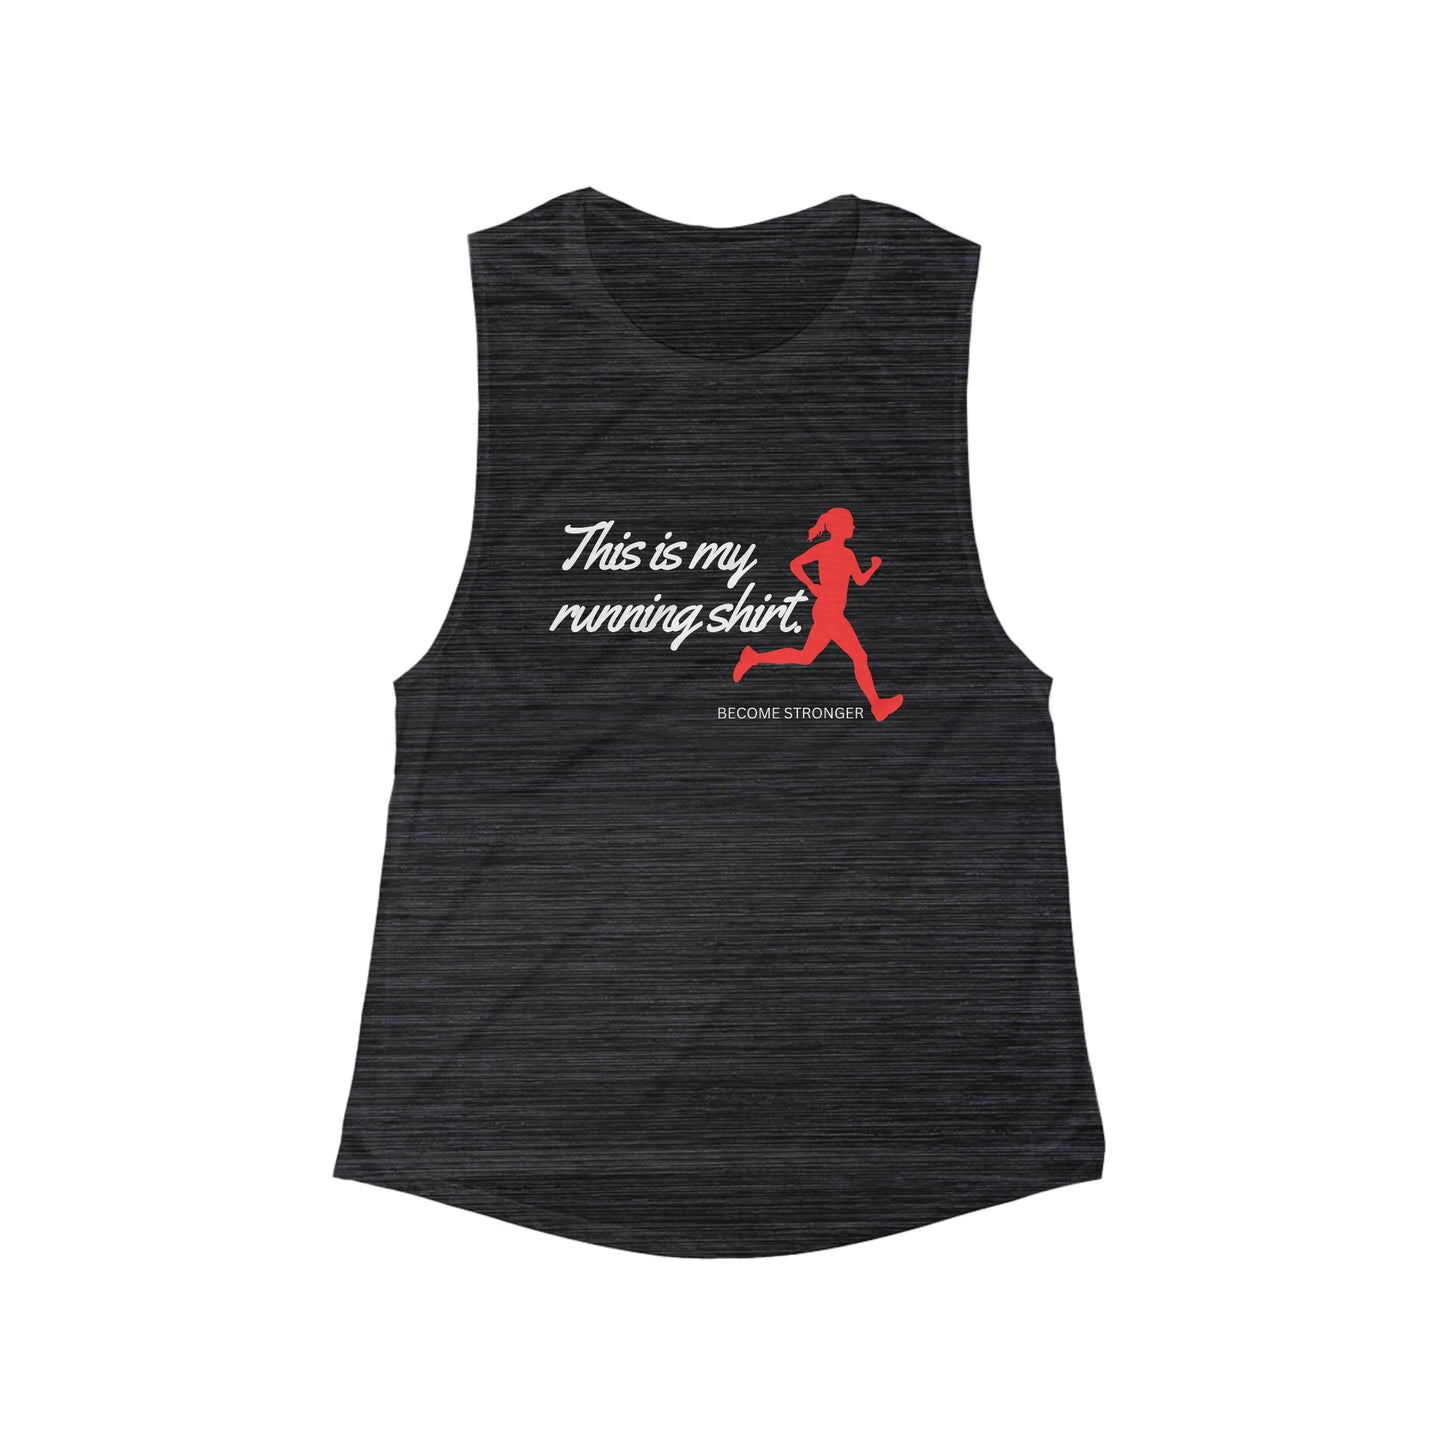 "This is my running shirt" Women's Muscle Tank